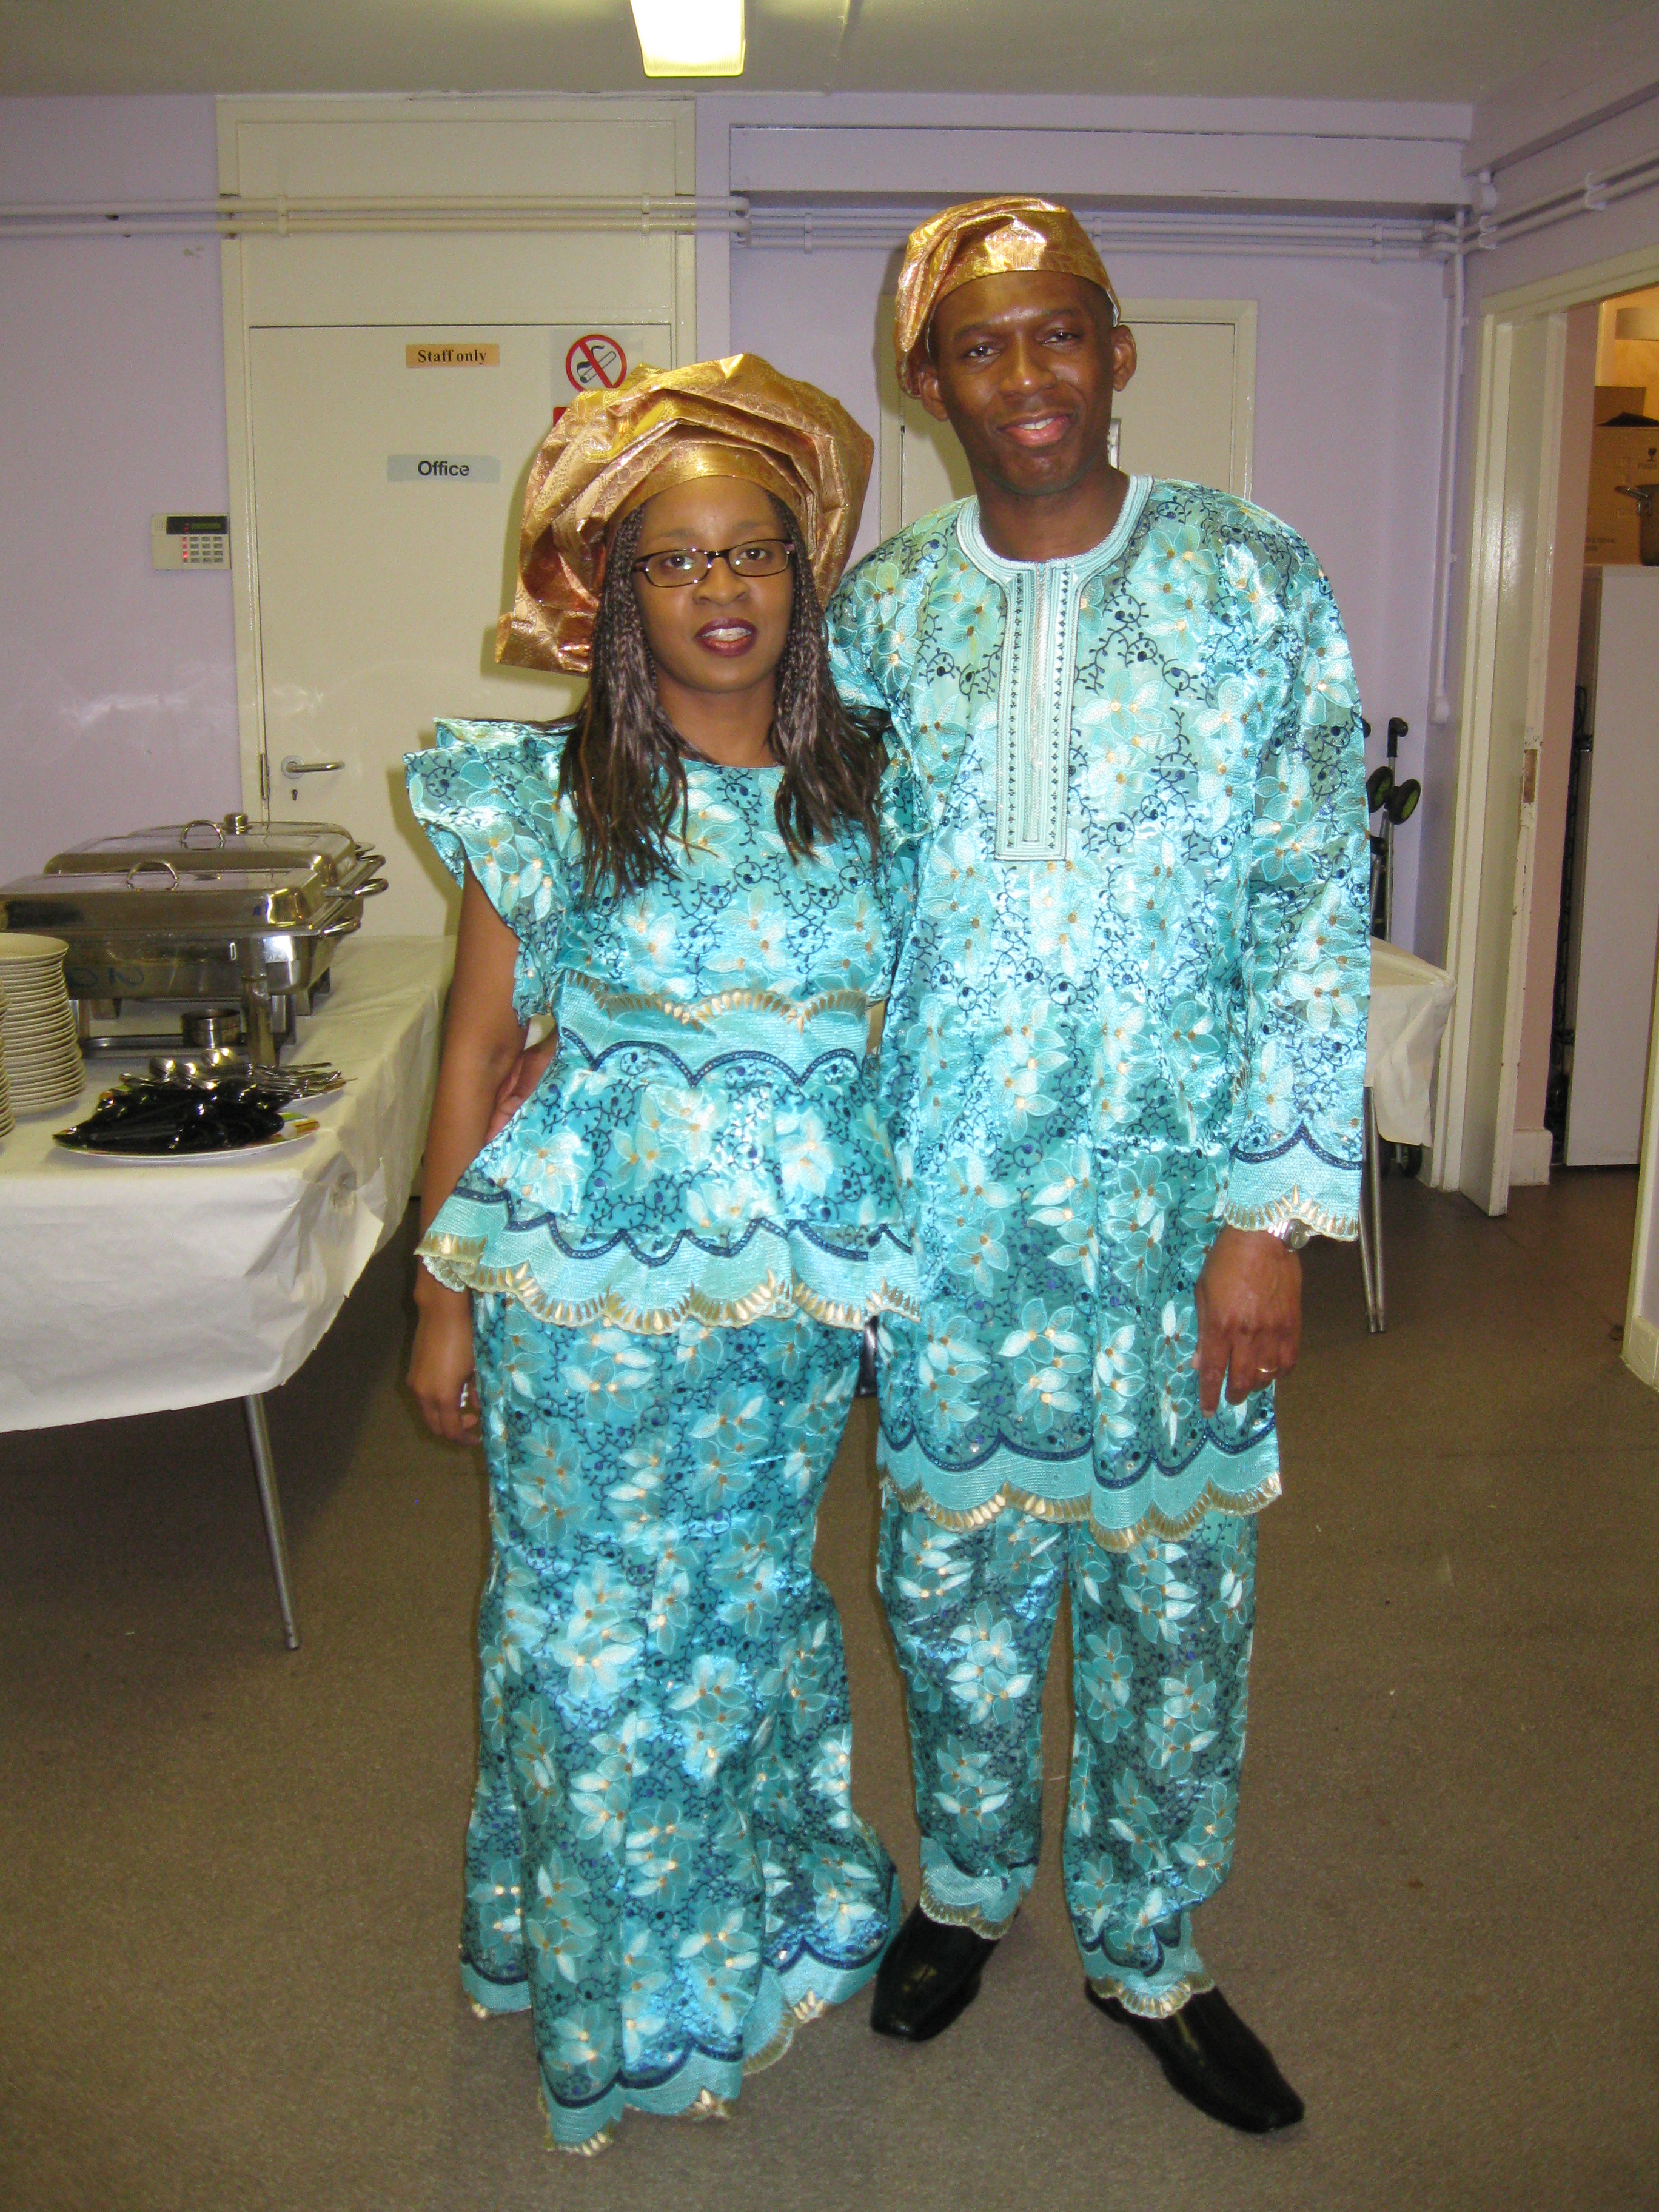 Actor David Olawale Ayinde and his wife Patricia Ngozi Ayinde, dressed in African Attire, at a Social Event